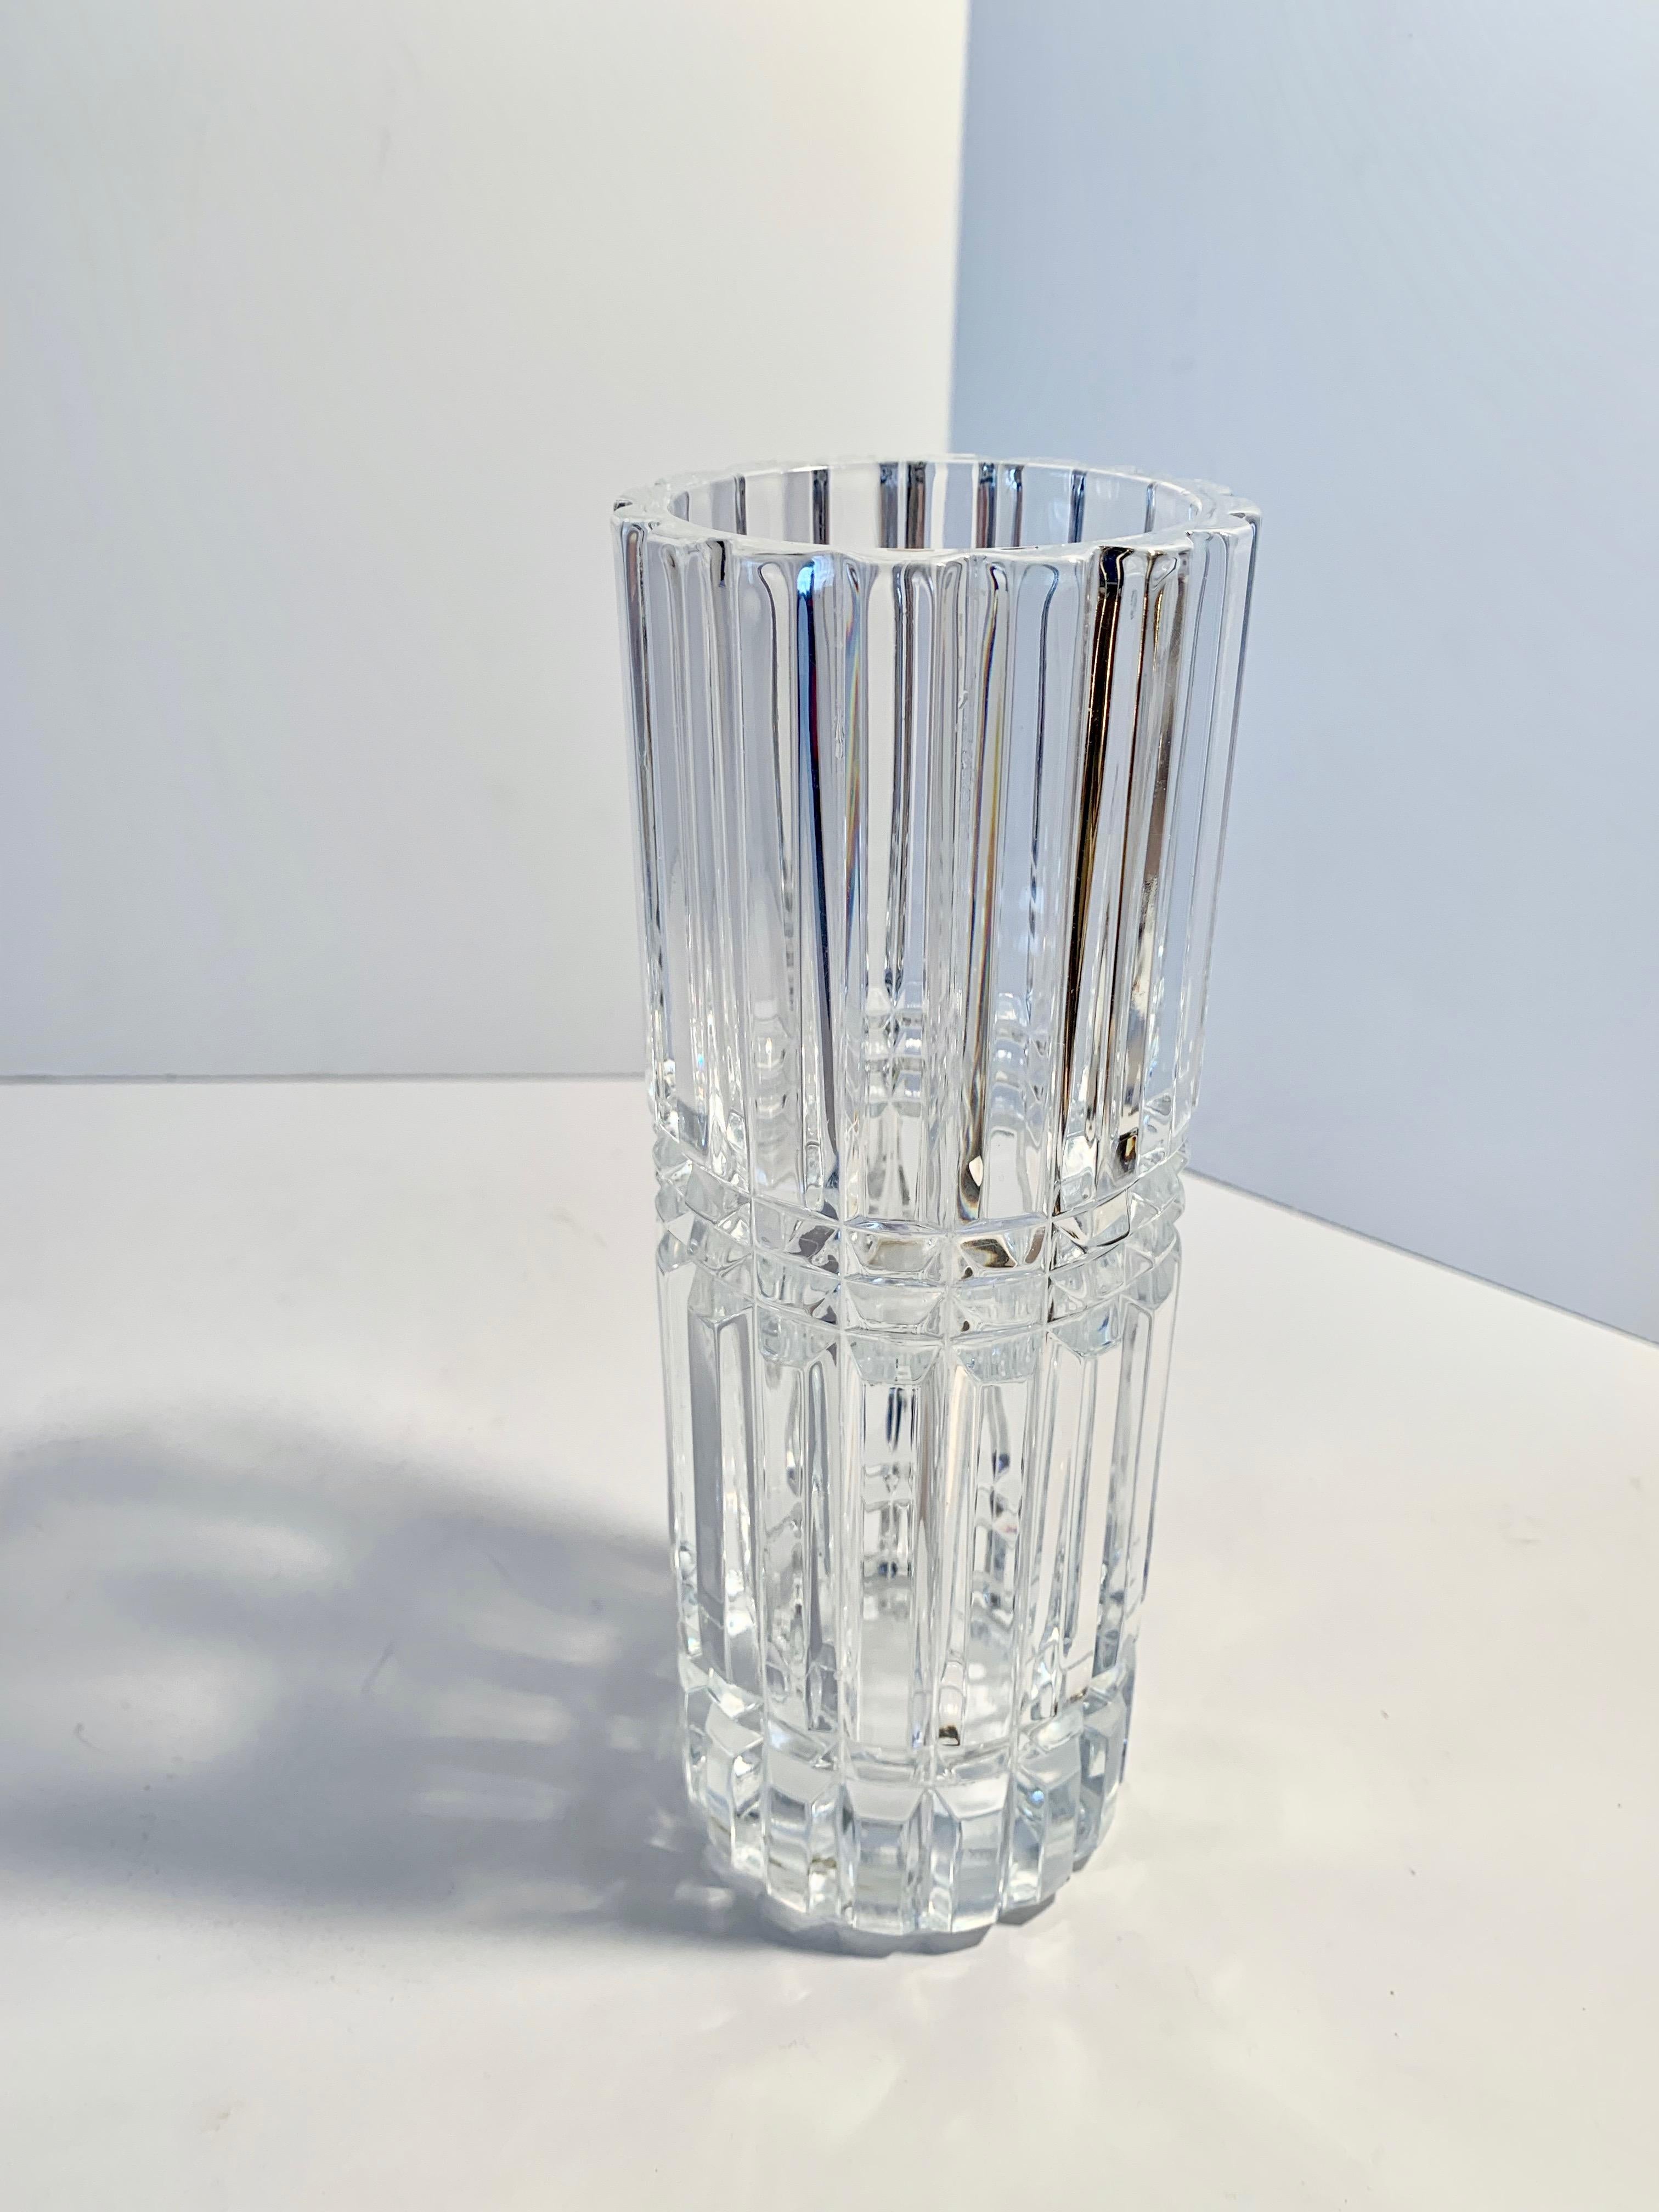 A stunning vase with architectural lines cut vertical with details for a bold modern look - perfect for any table or shelf!